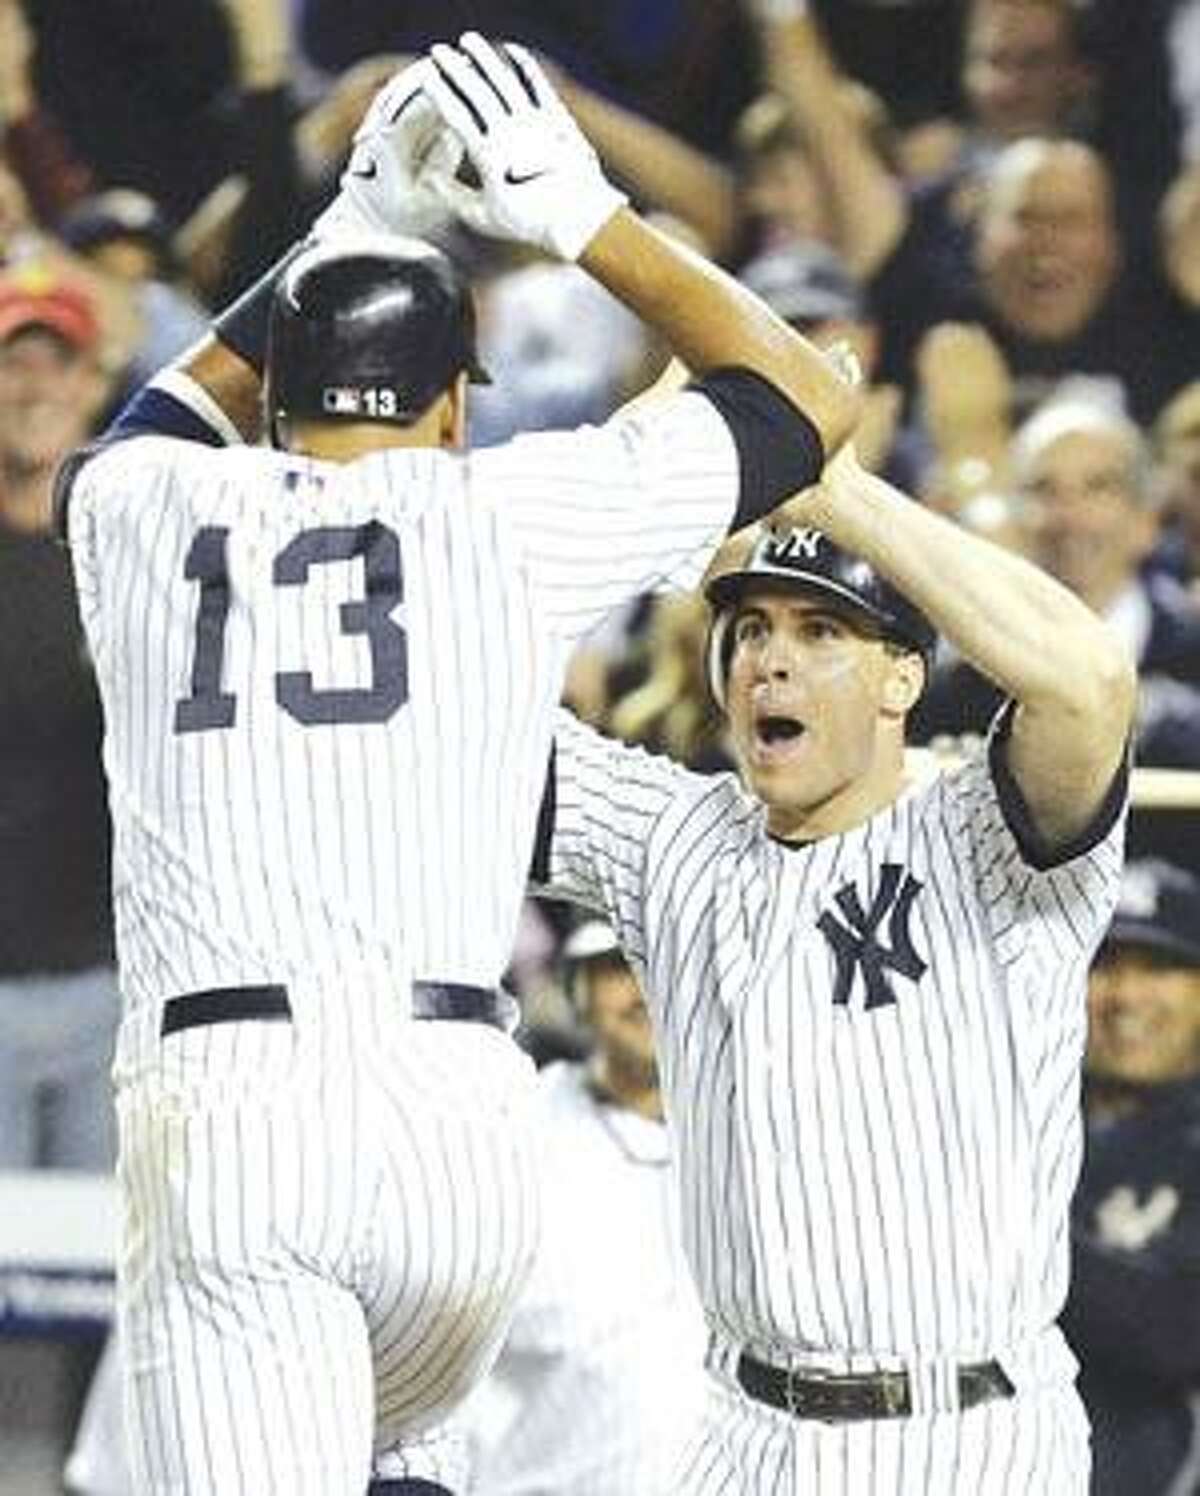 New York Yankee Alex Rodriguez, left, celebrates with teammate Mark Teixeira after hitting a ninth inning two-run home run against the Minnesota Twins in Game 2 of the American League division series at Yankee Stadium in New York Friday.